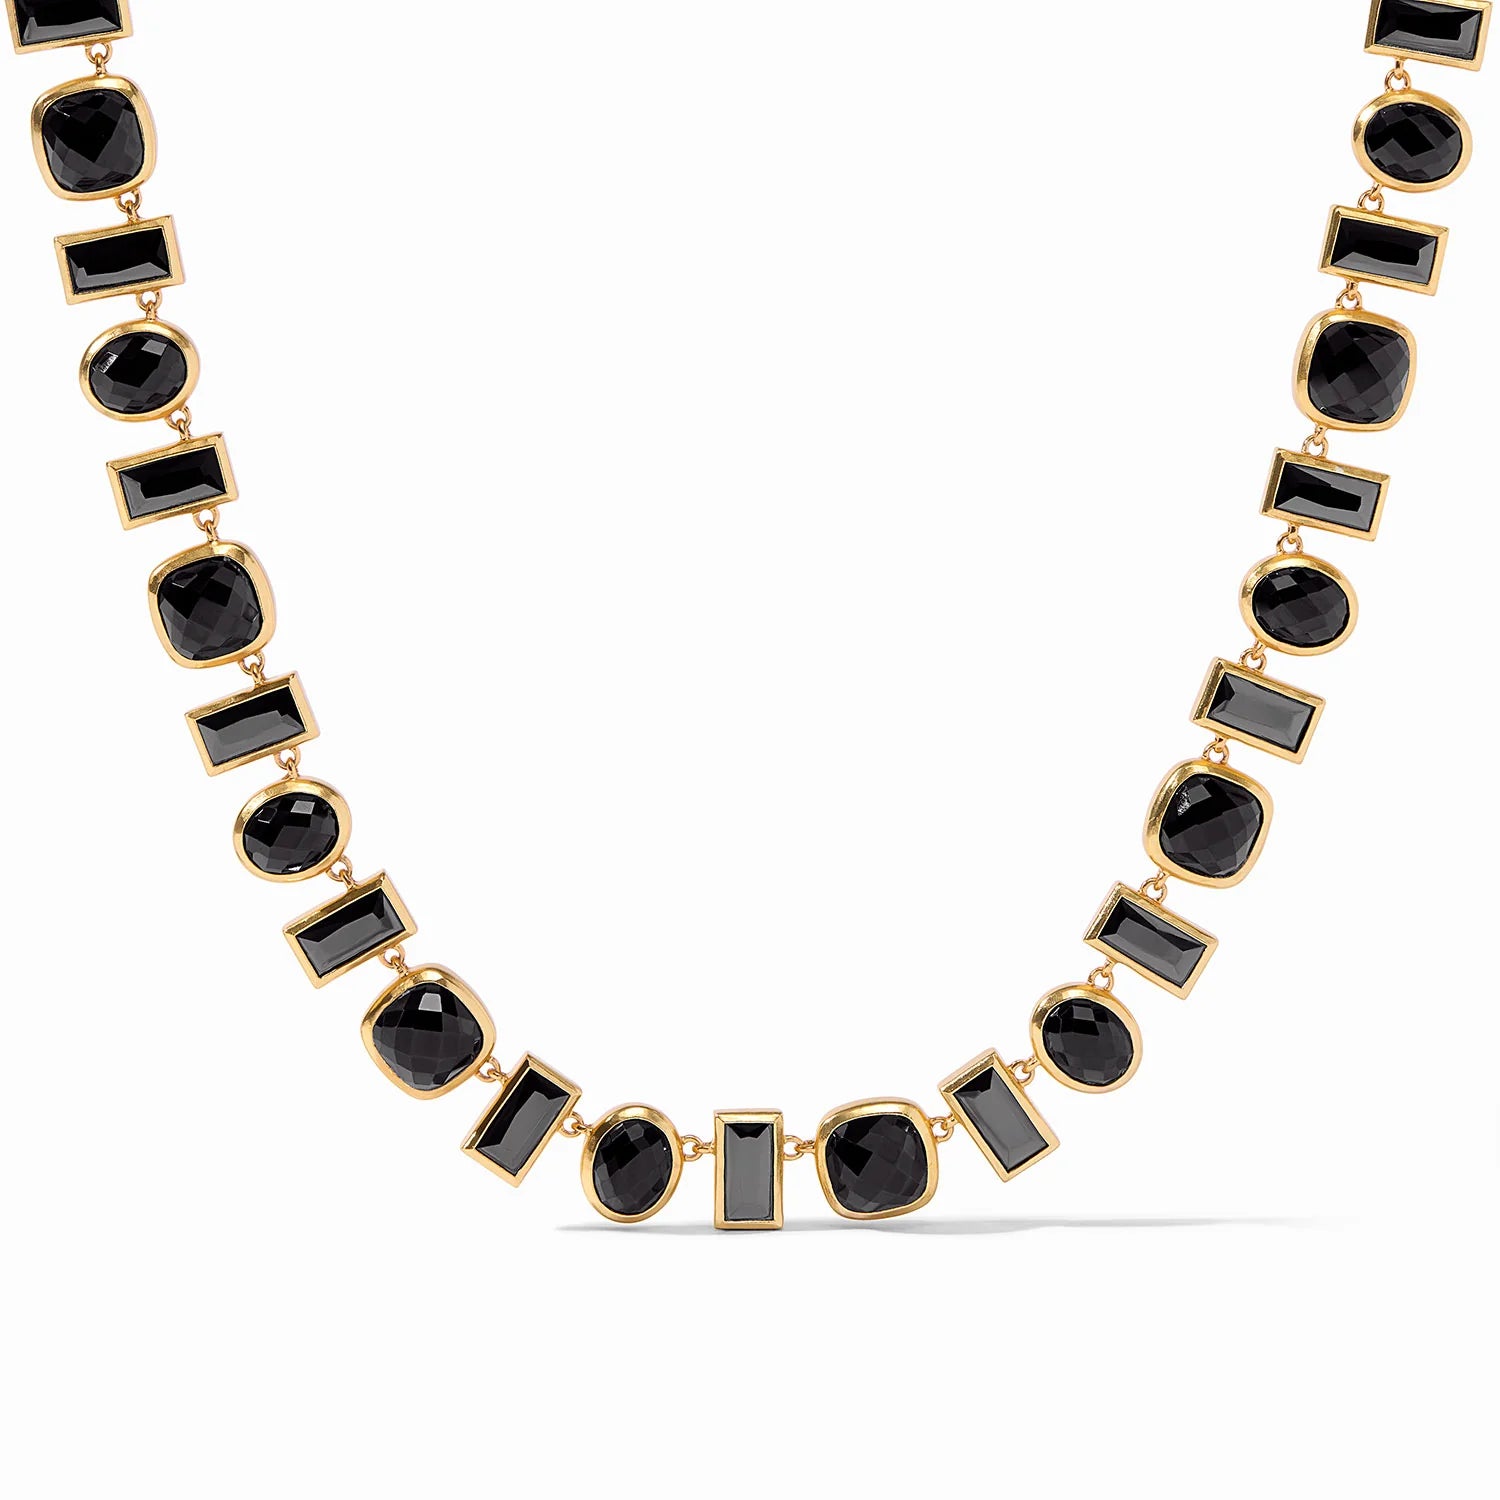 Gold necklace with black, rectangle crystals and square, iridescent clear crystals linked together. This necklace is pictured on a white background.